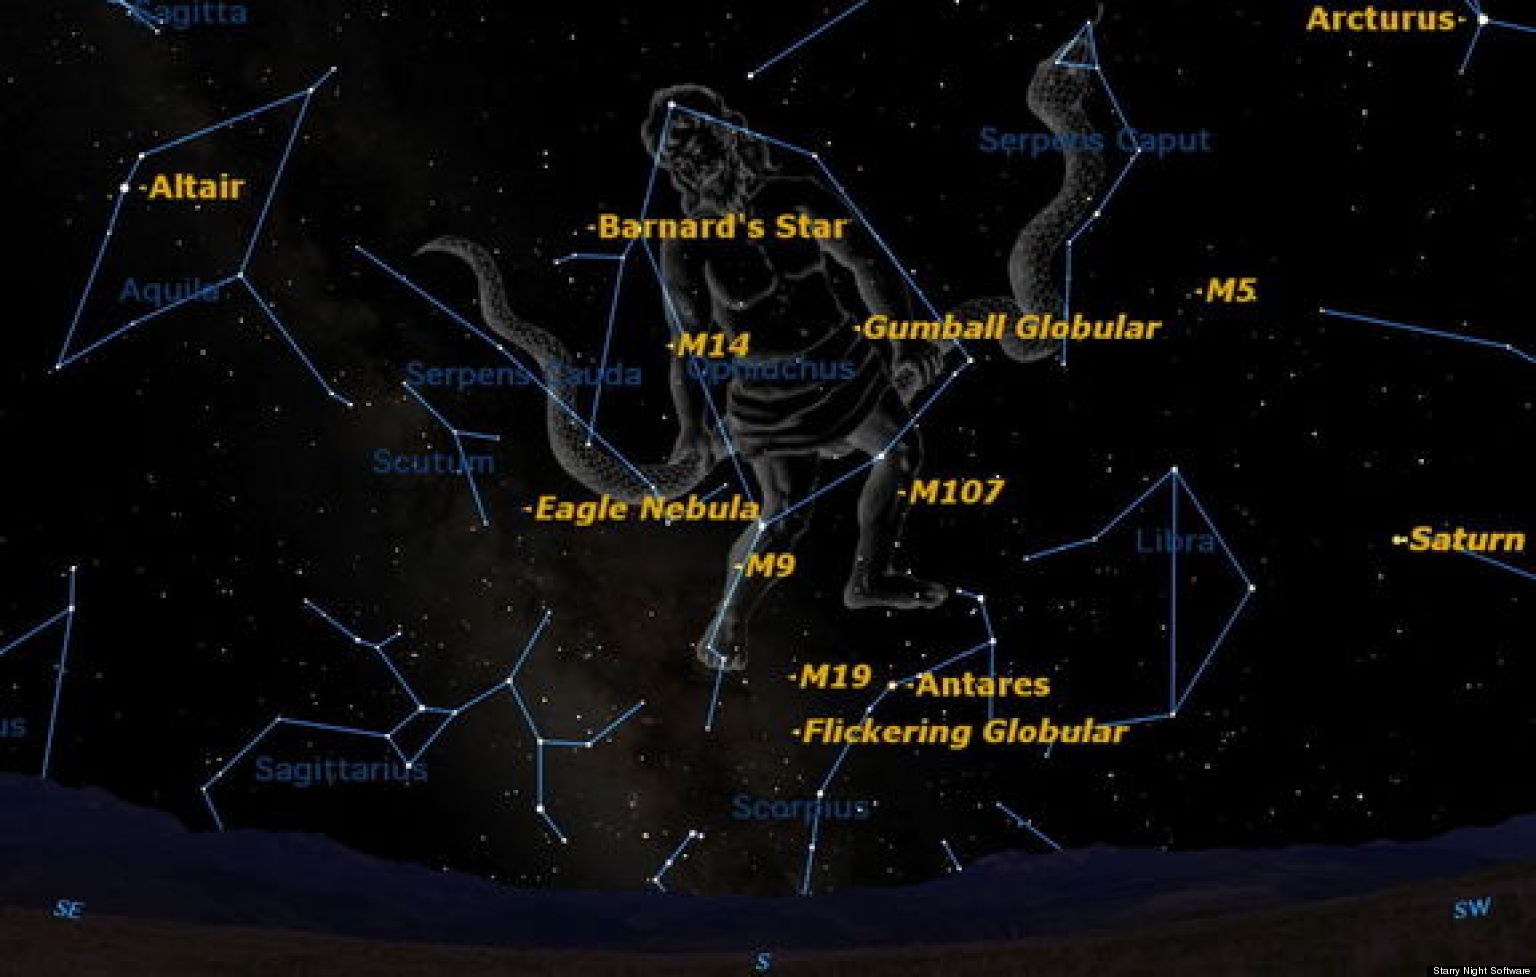 they say this constellation squeezed it&#039;s way in, but YourTango clarifies ... https://www.yourtango.com/2018309725/horoscope-how-zodiac-signs-change-over-time-according-astrological-progression